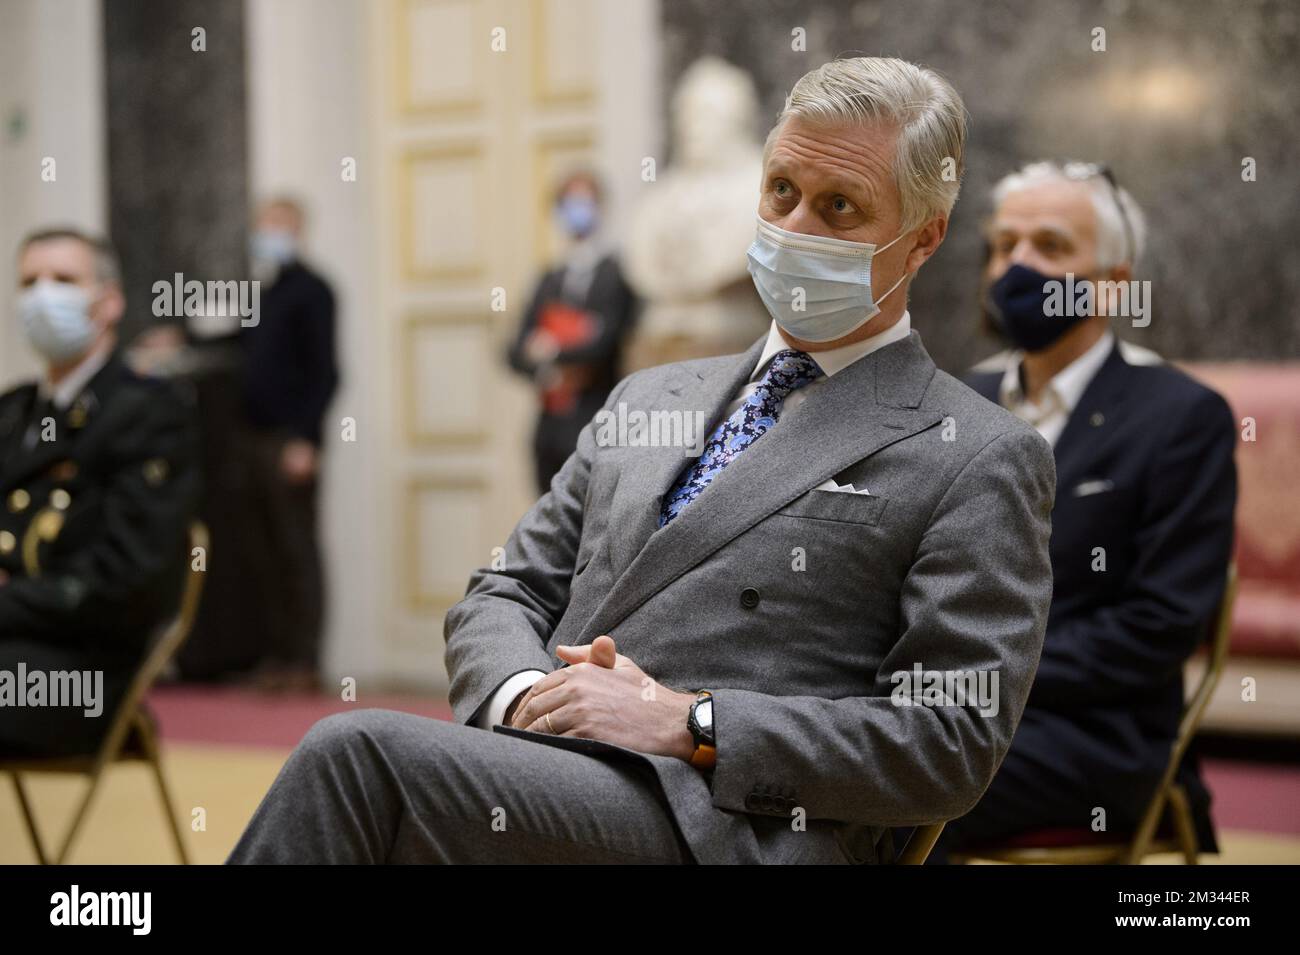 King Philippe - Filip of Belgium pictured at a ceremony to award the 'Francqui-Collen Prize 2020', Wednesday 16 December 2020, in Brussels. The scientific prize, which is often referred to as the 'Belgian Nobel Prize', is awarded by The Francqui Foundation and is worth 250.000 euros. BELGA PHOTO POOL CHRISTOPHE LICOPPE  Stock Photo